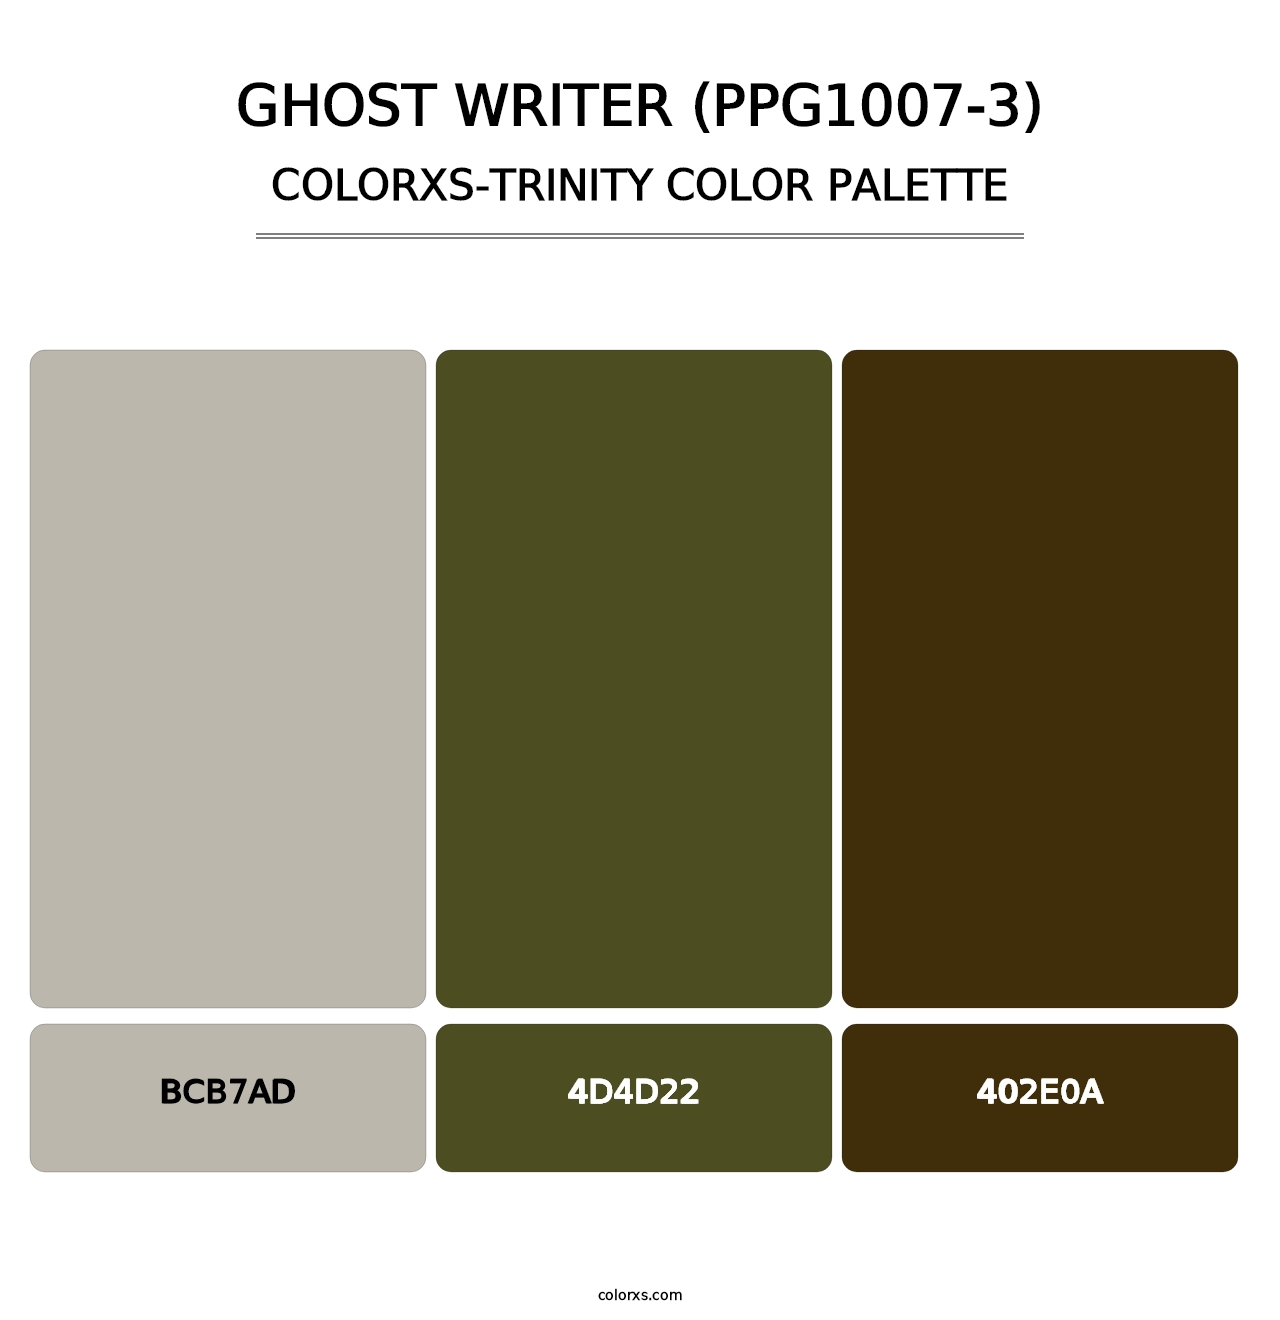 Ghost Writer (PPG1007-3) - Colorxs Trinity Palette